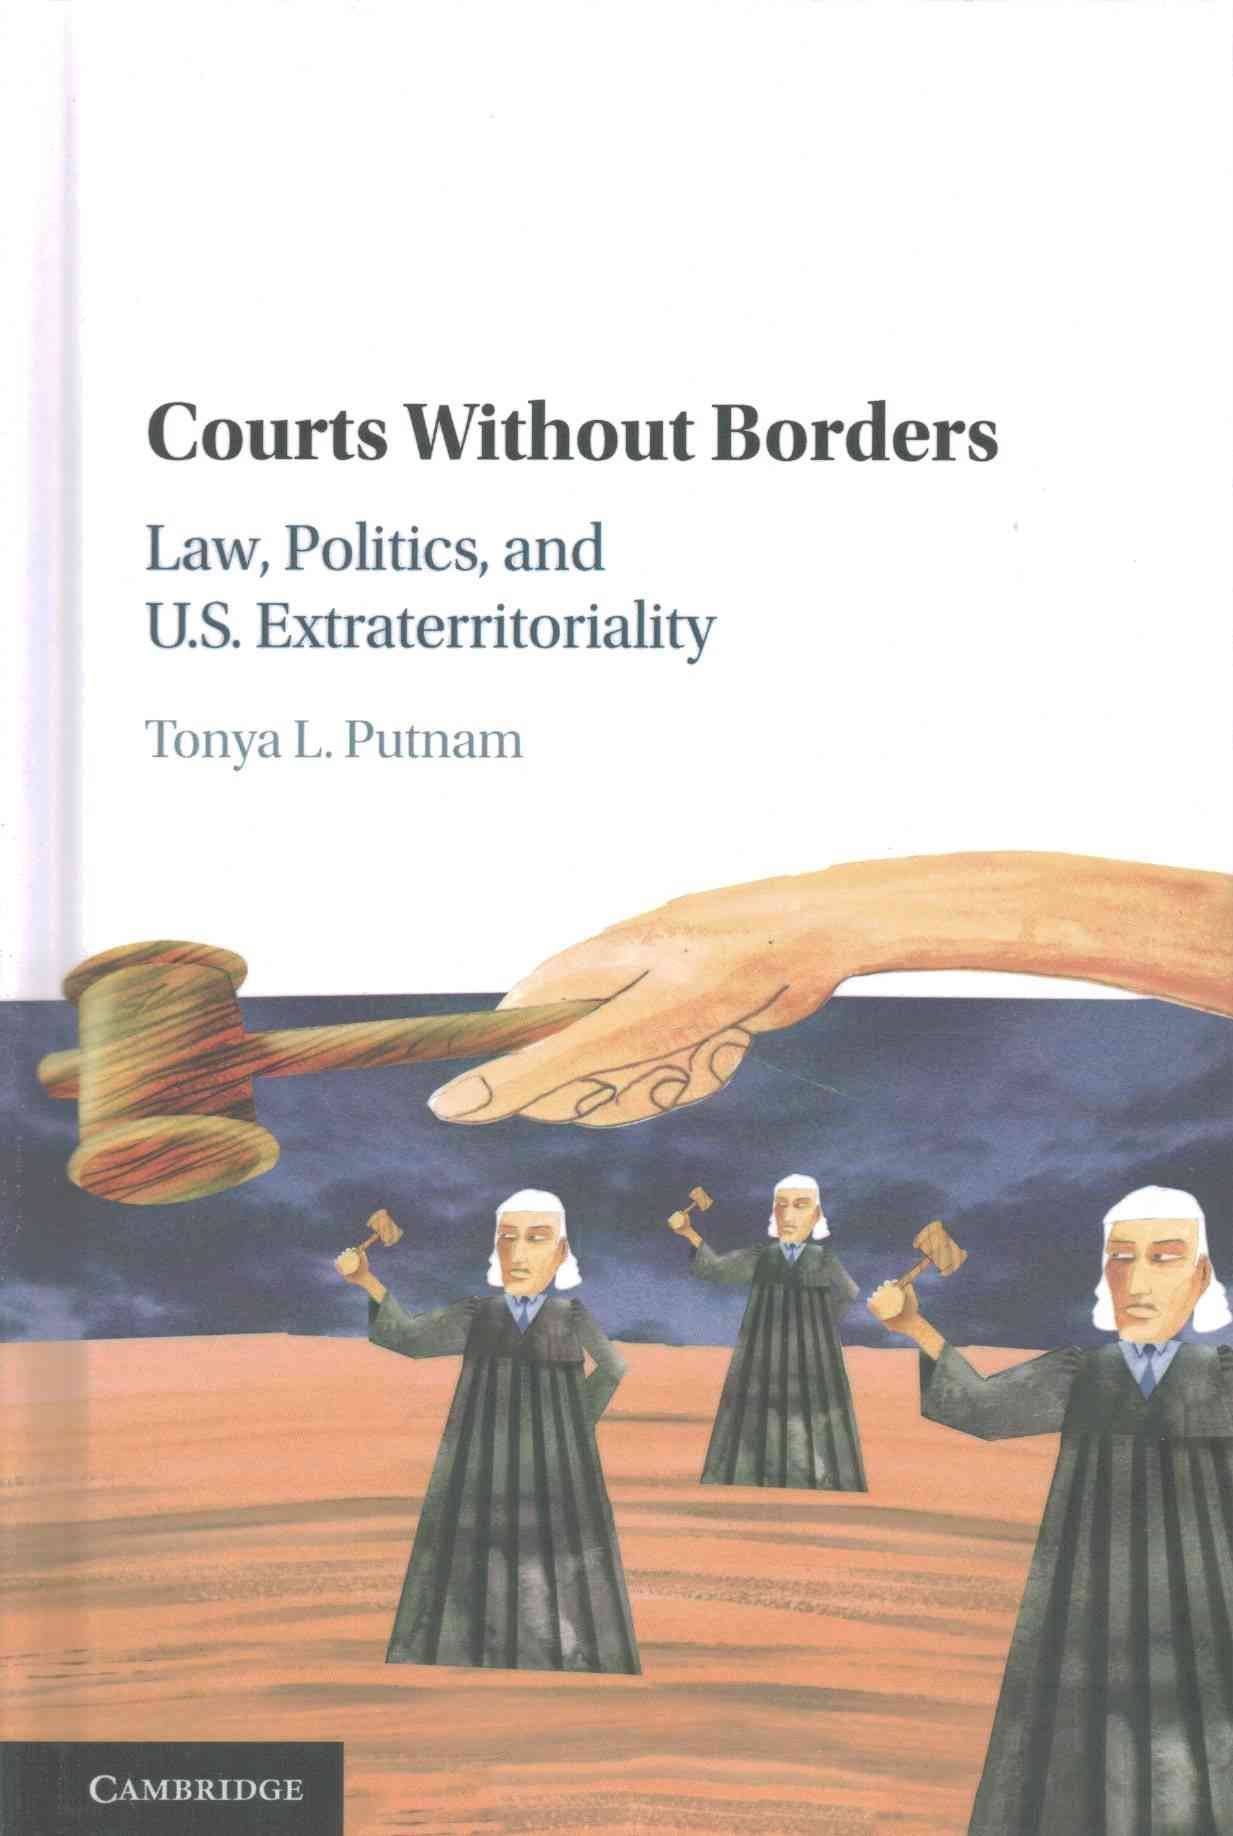 Courts without borders : law, politics, and U.S. extraterritoriality / Tonya L. Putnam.